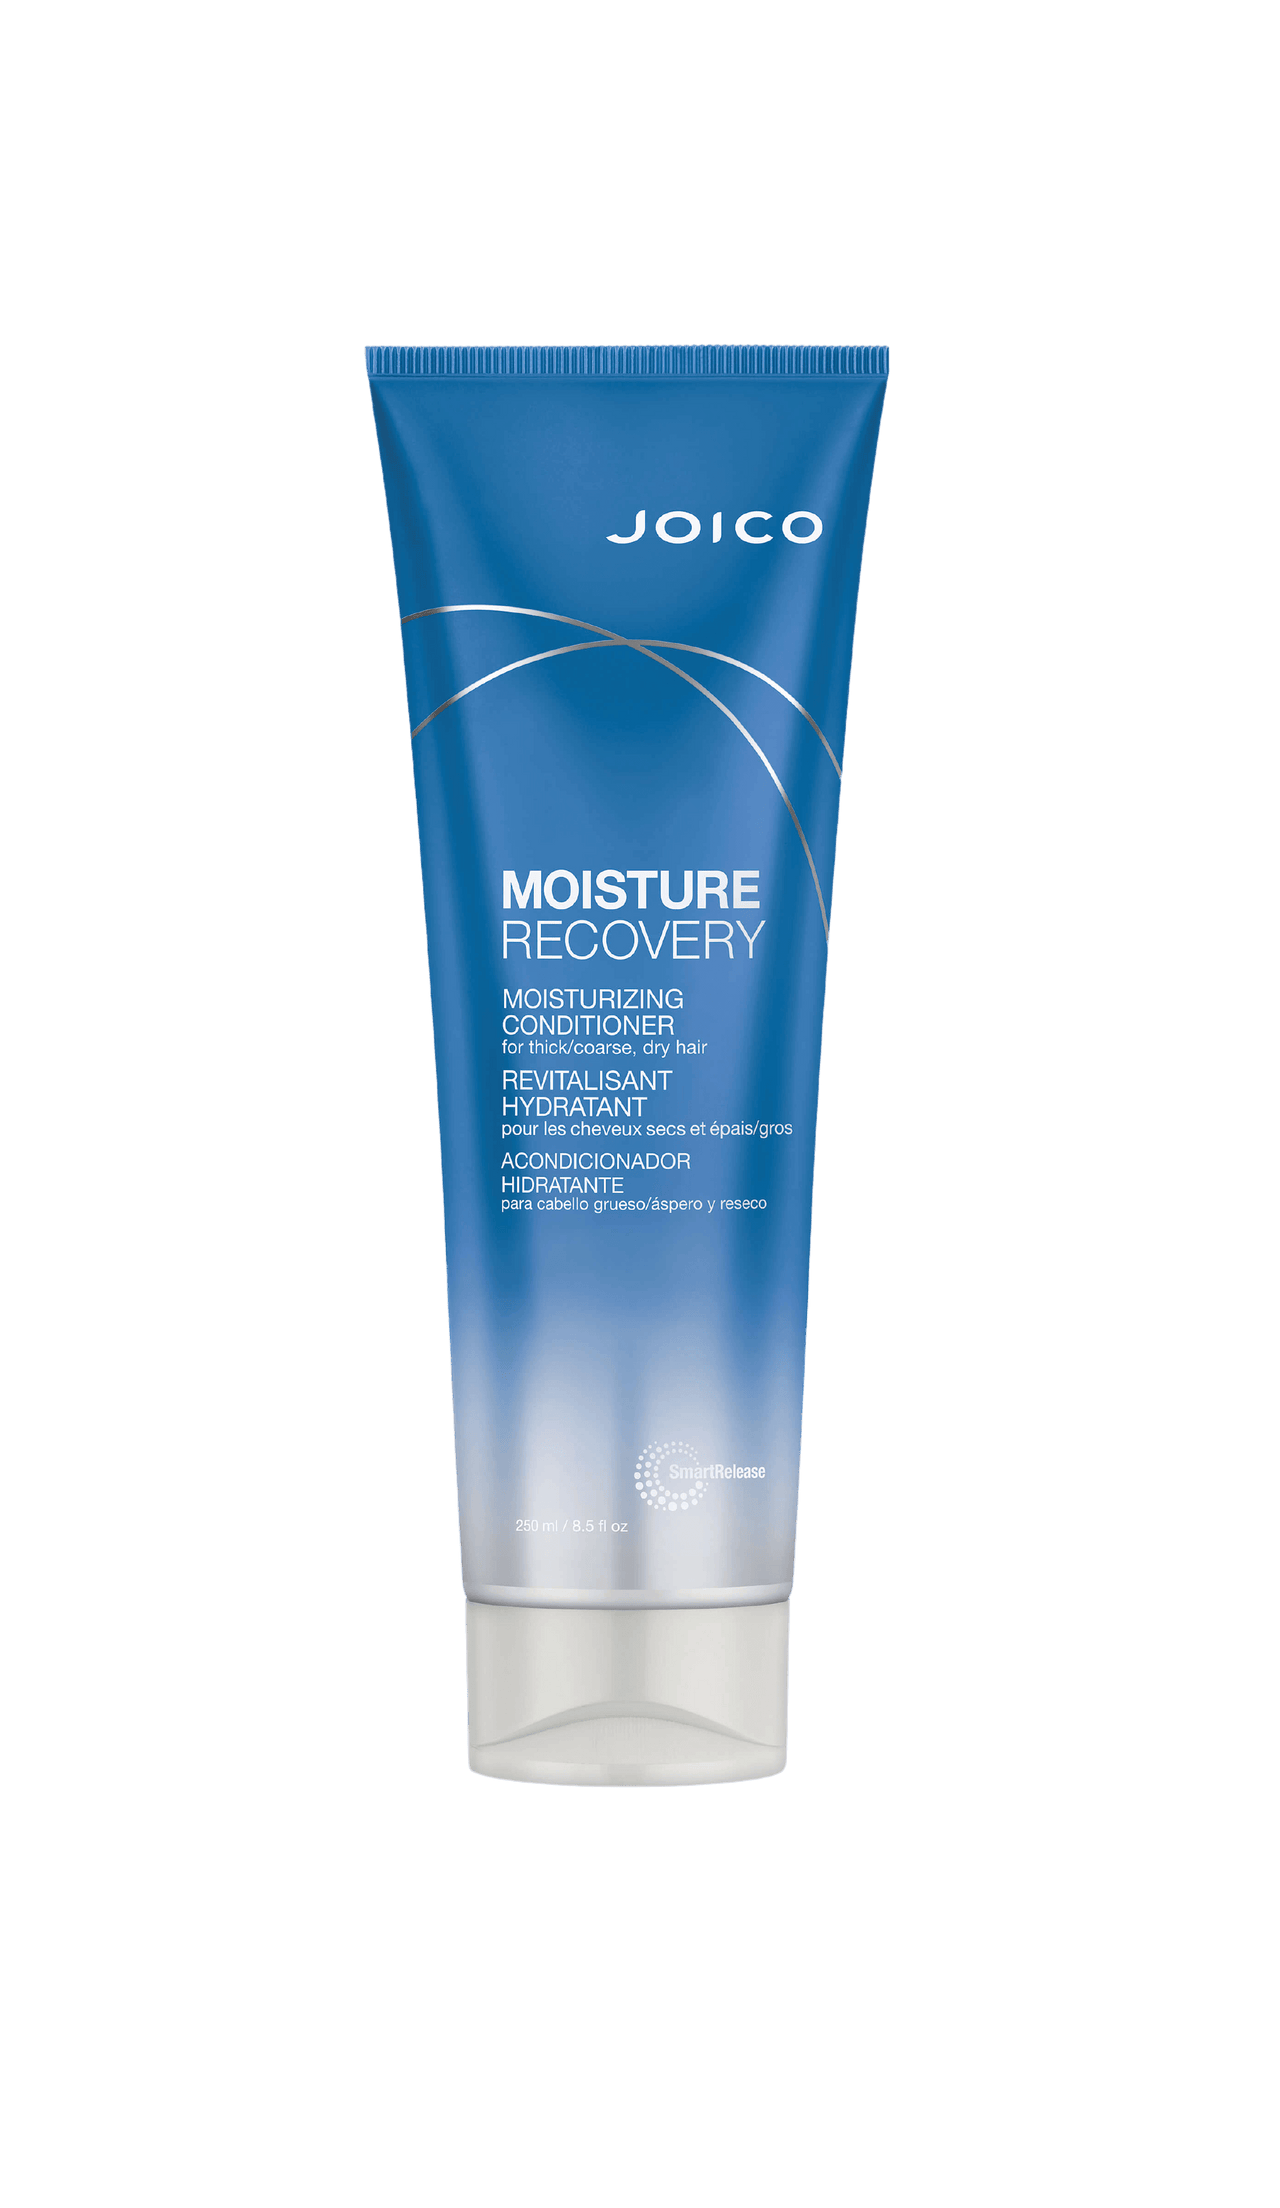 Joico Moisture Recovery Conditioner 250mL Tube